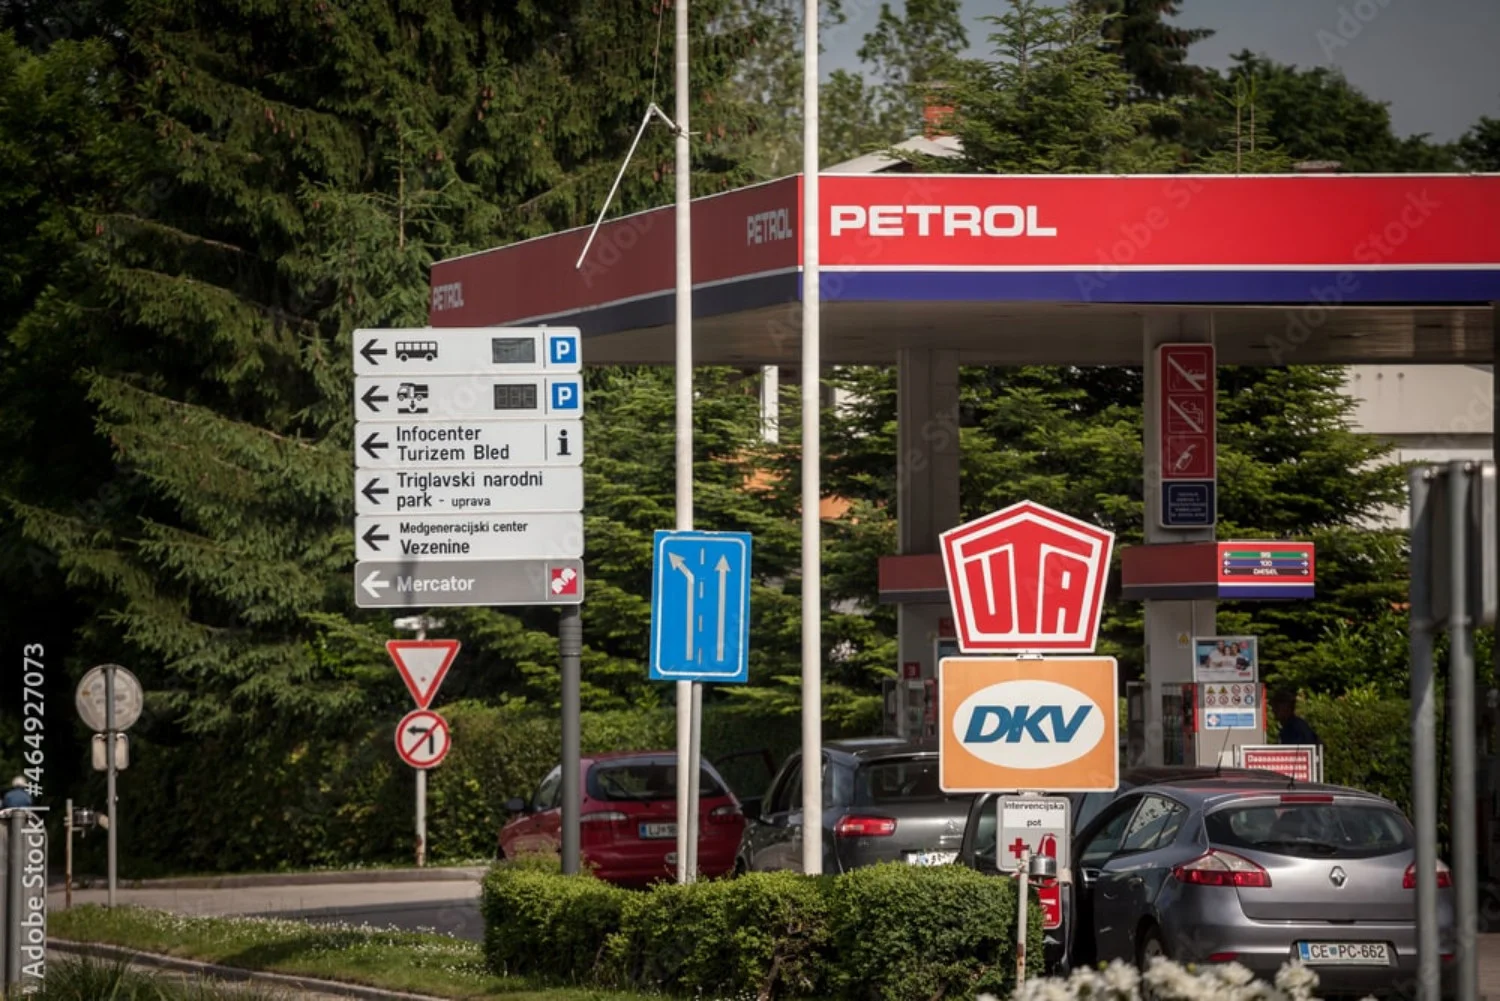 The leading brand in Slovenia, Petrol is regarded as a reliable brand.